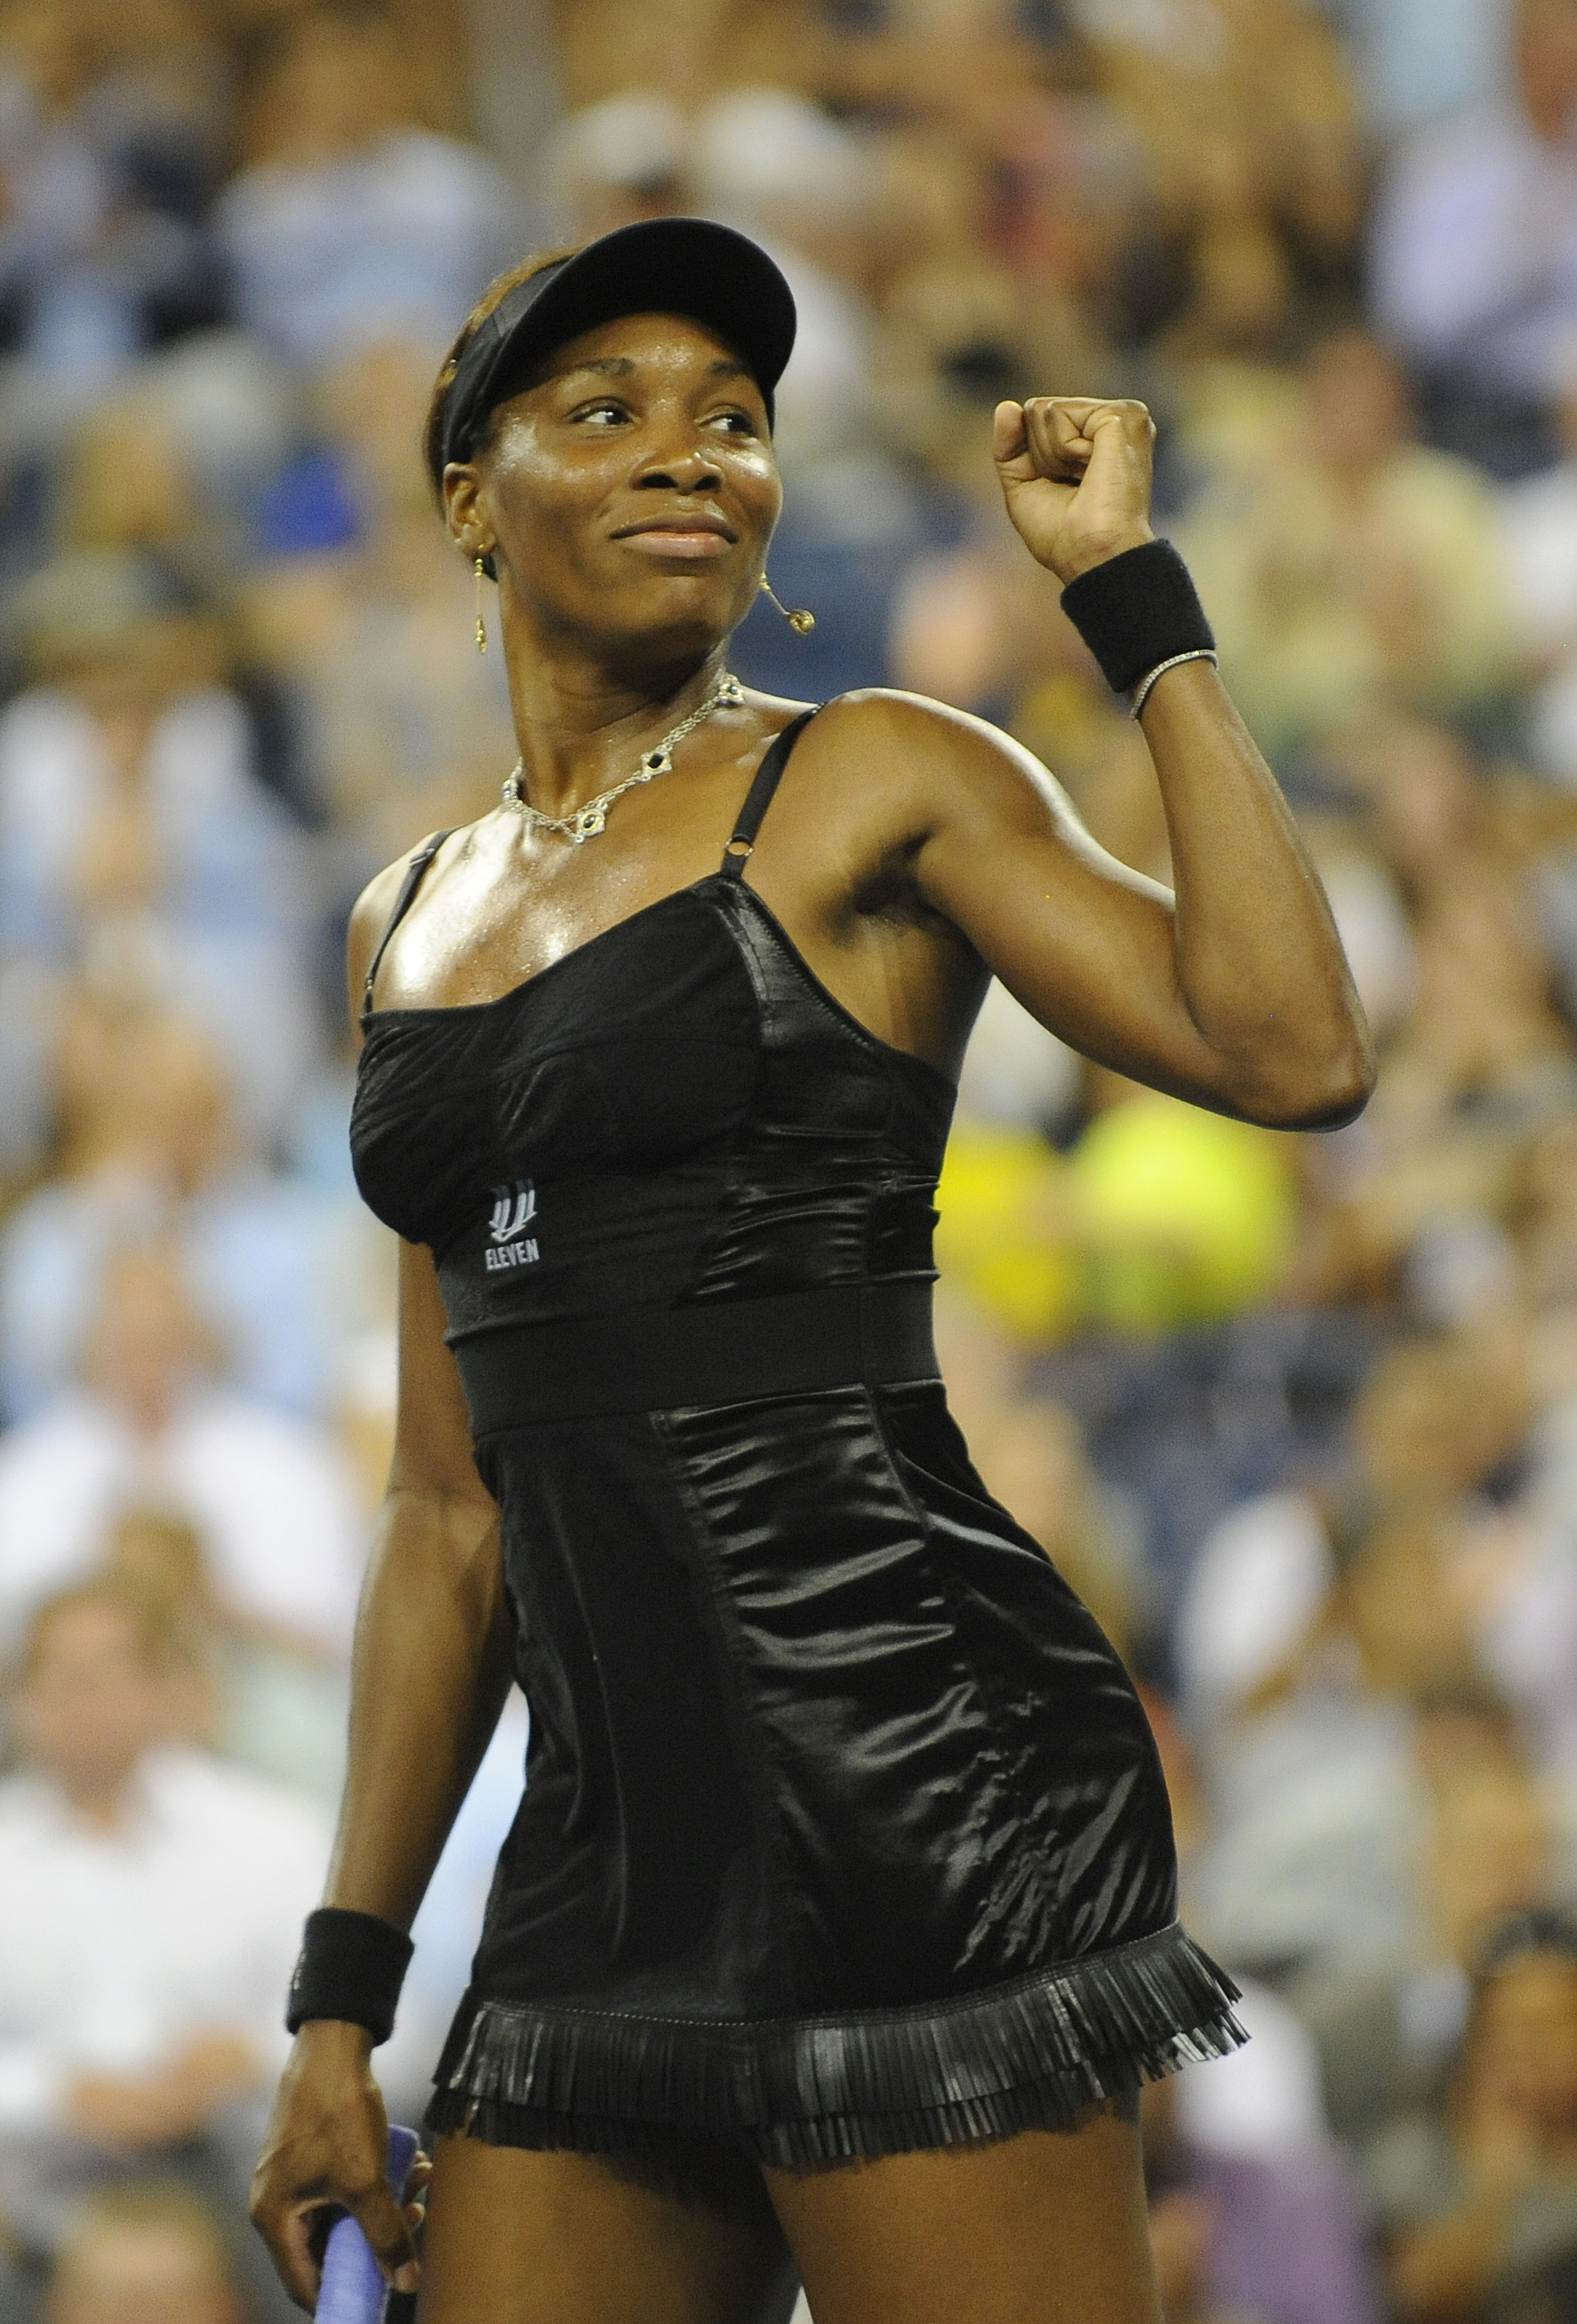 Venus Williams August 30, 2010 in New York. | Source: Getty Images